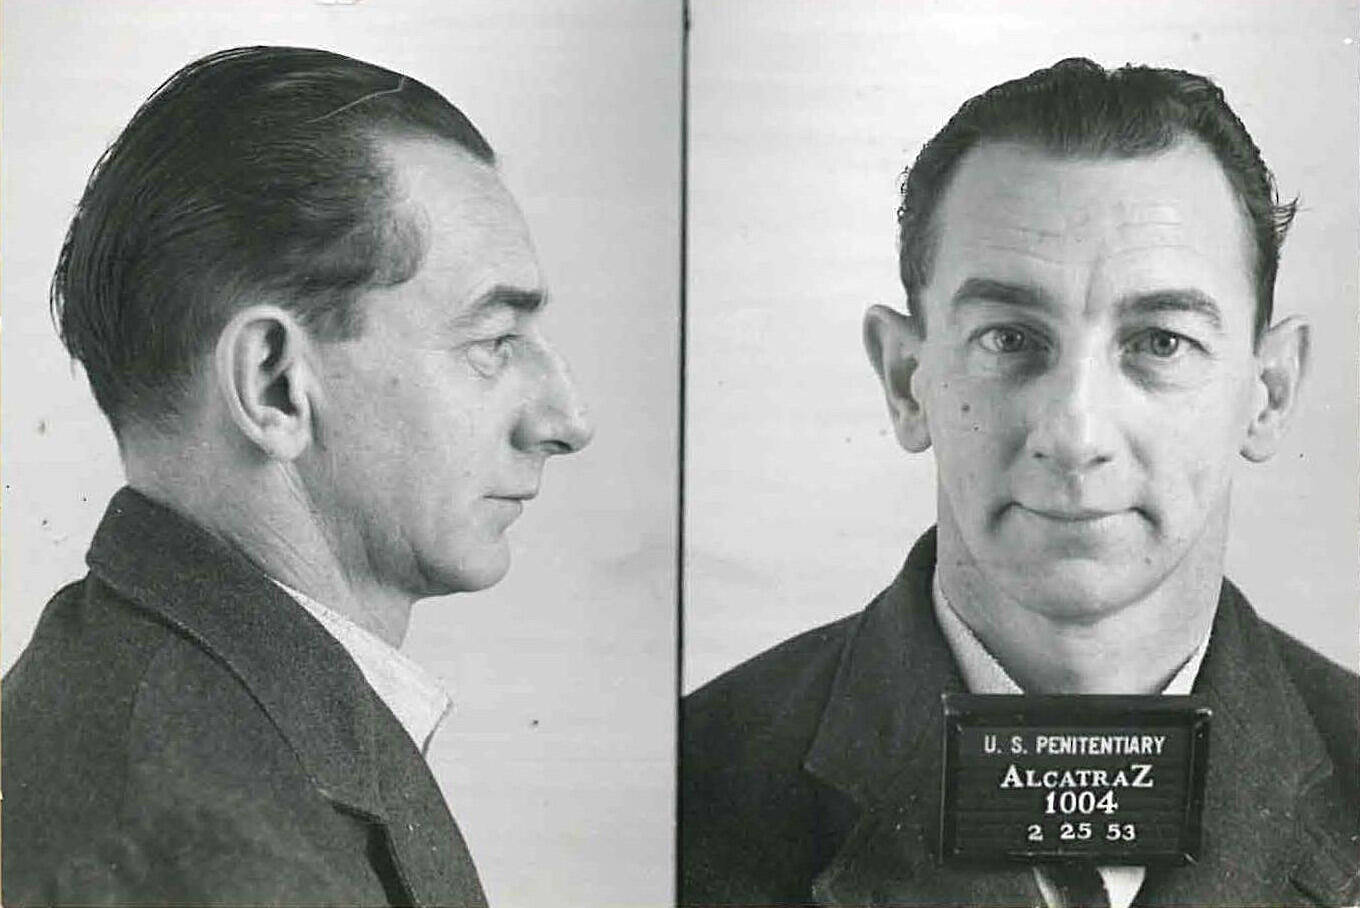 Chester LeRoy Oughton’s entry photos at the Alcatraz Island federal penitentiary in 1953. Oughton was convicted of first-degree murder in Alaska. (Image courtesy of the National Archives in San Francisco)